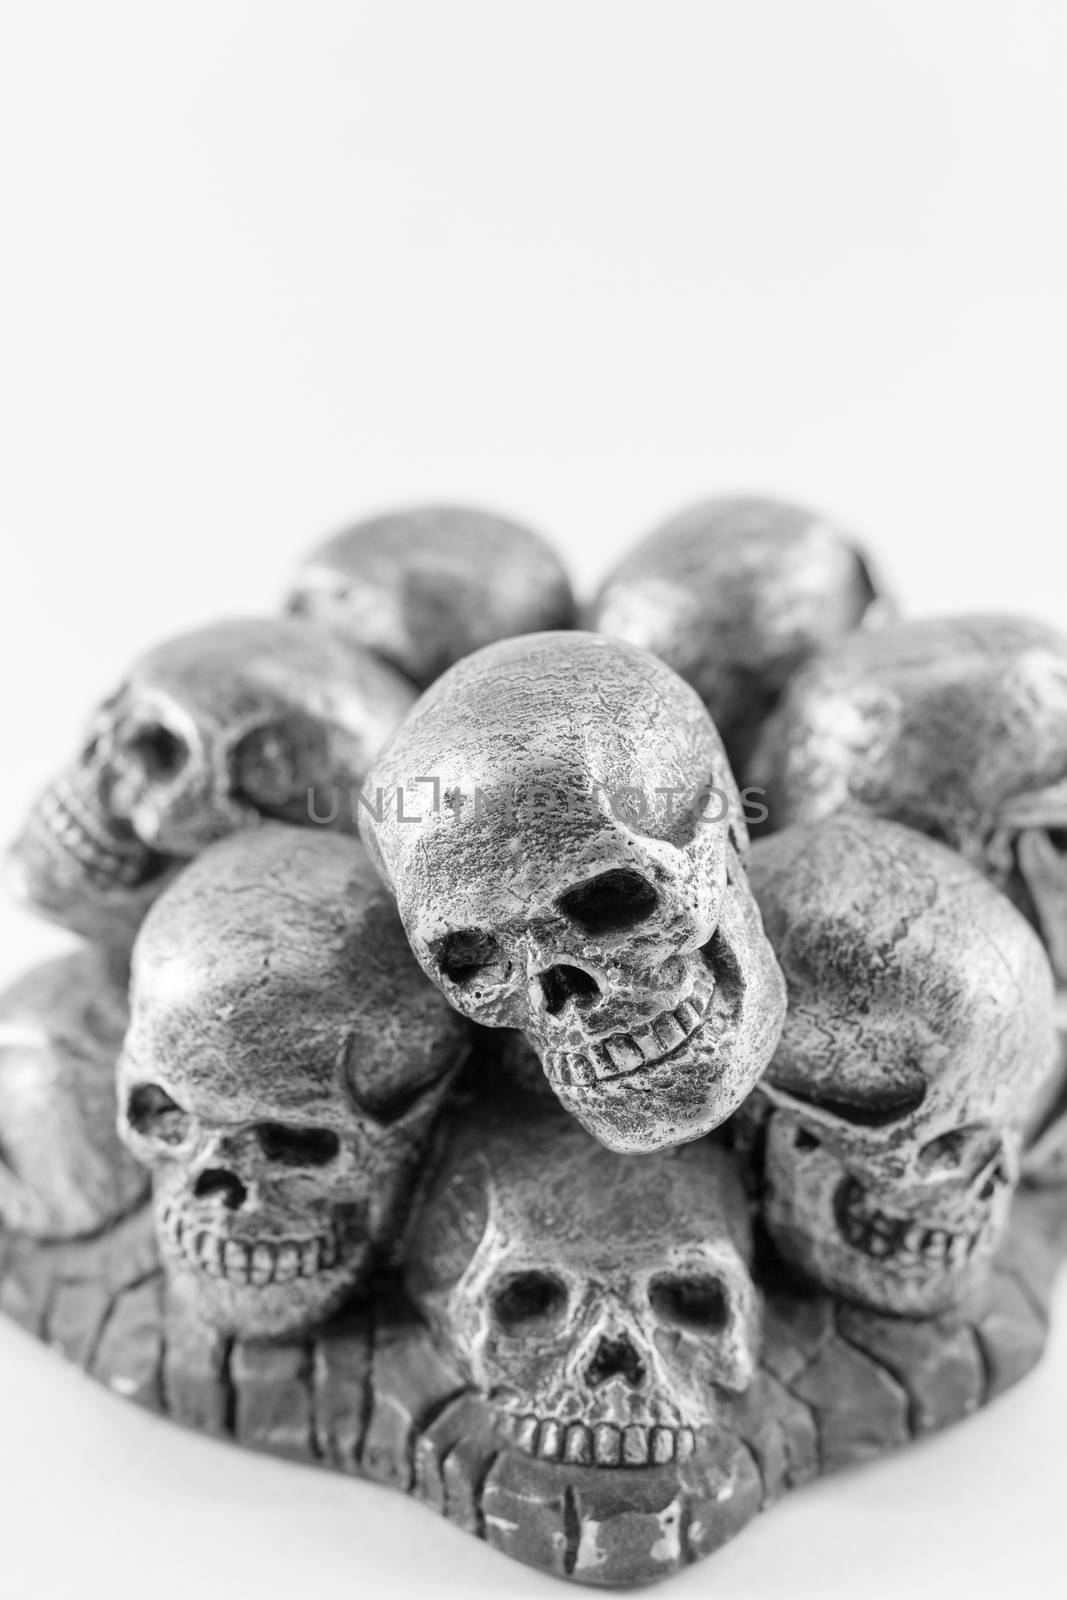 Simulation human skull on White Background by ronnarong